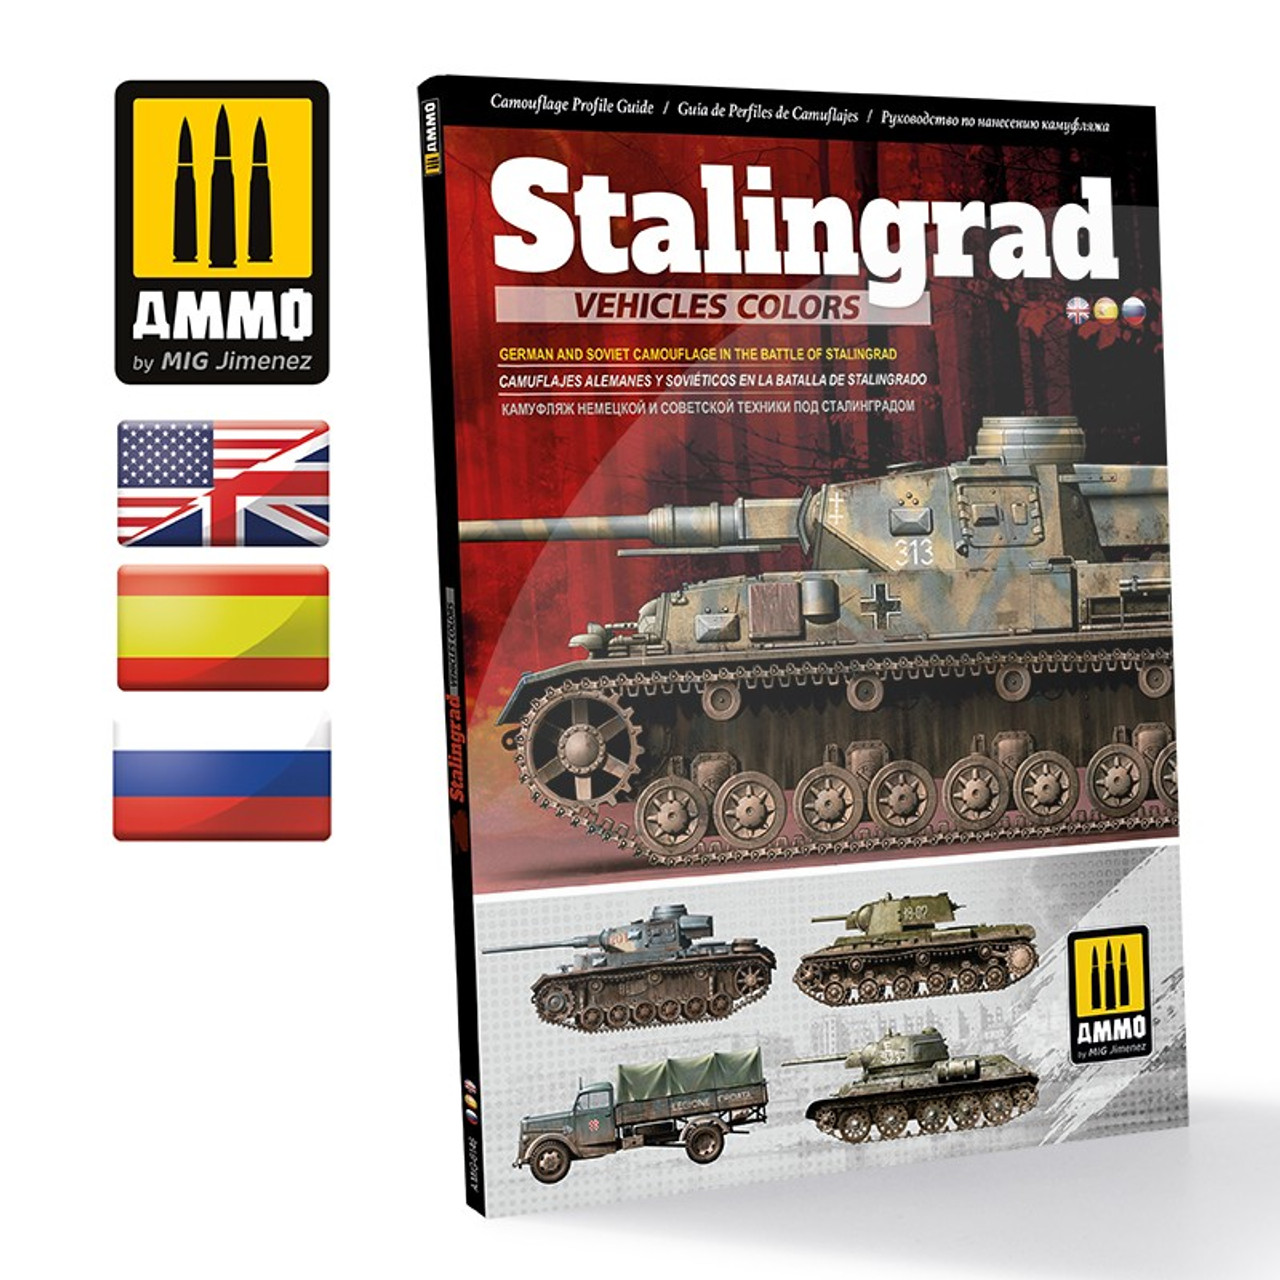 Stalingrad Vehicles Colors - German and Russian Camouflages in the Battle of Stalingrad - AMIG6146